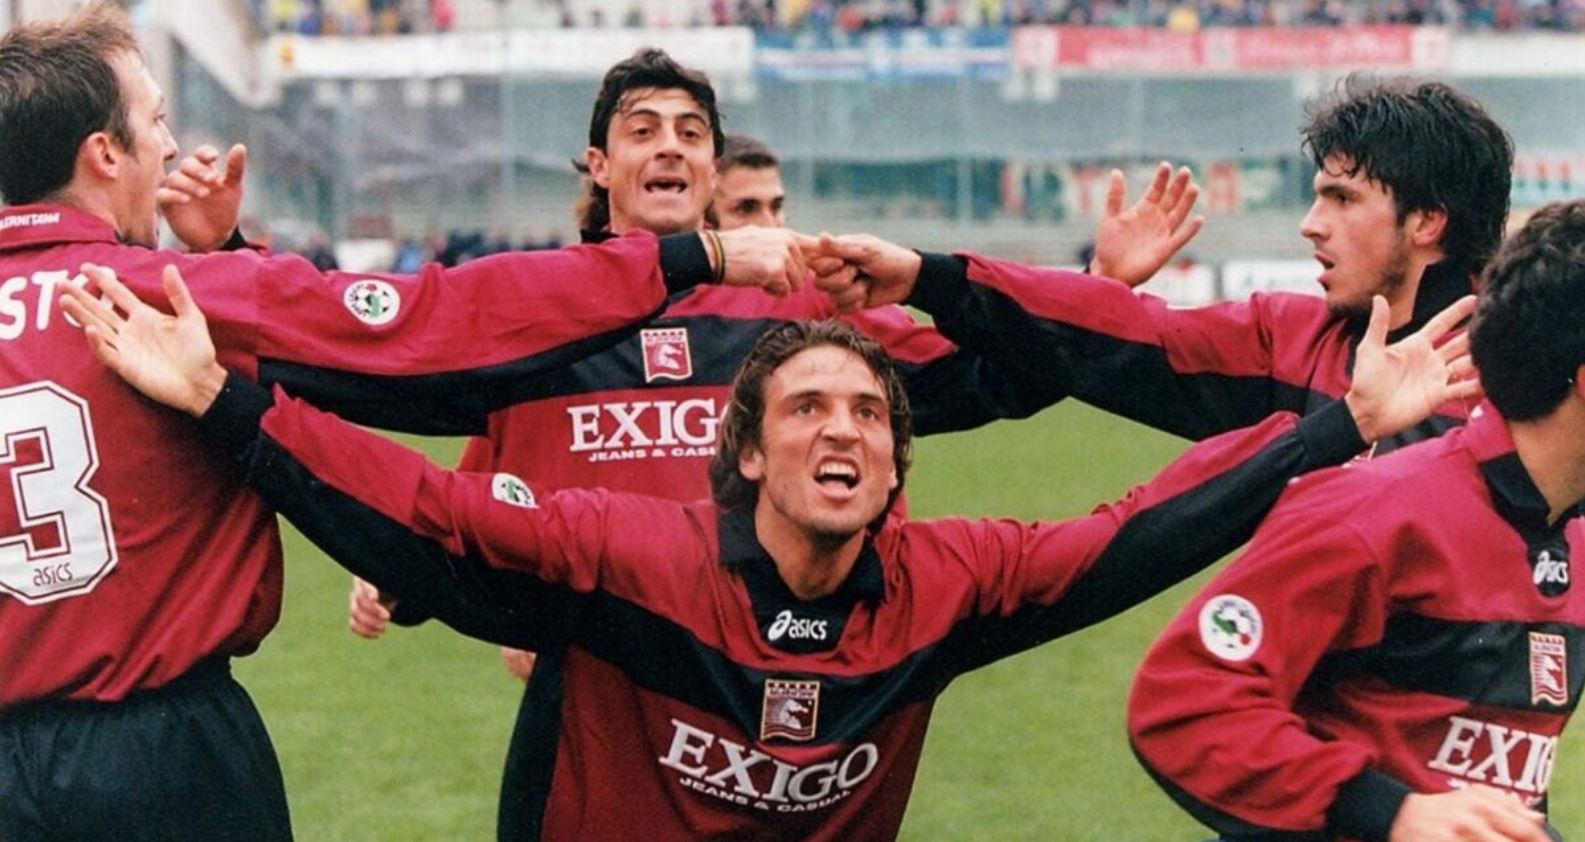 When they received Roma at the Stadio Arechi in January 1999 for Serie A Matchday 19, things were not going well for Salernitana